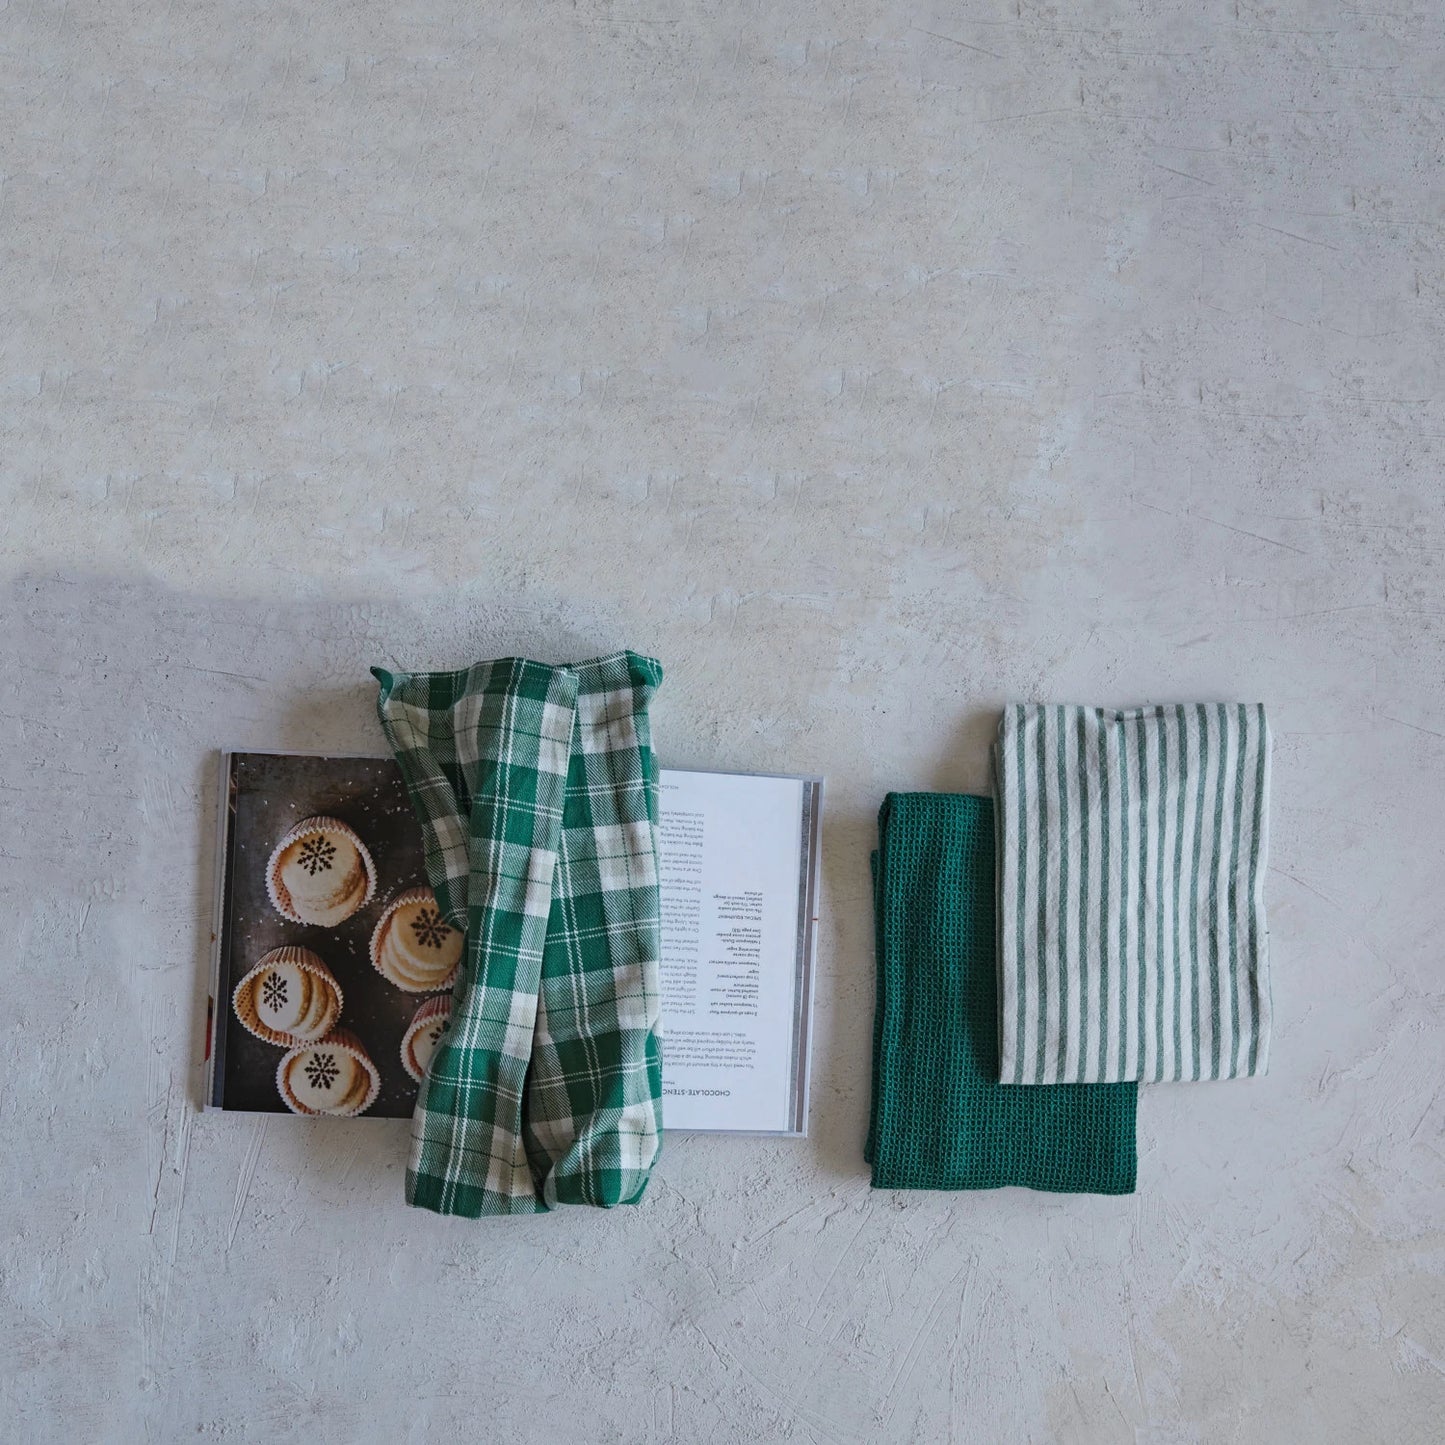 Cotton Woven/Waffle Weave Tea Towels, Green & White, Set of 3